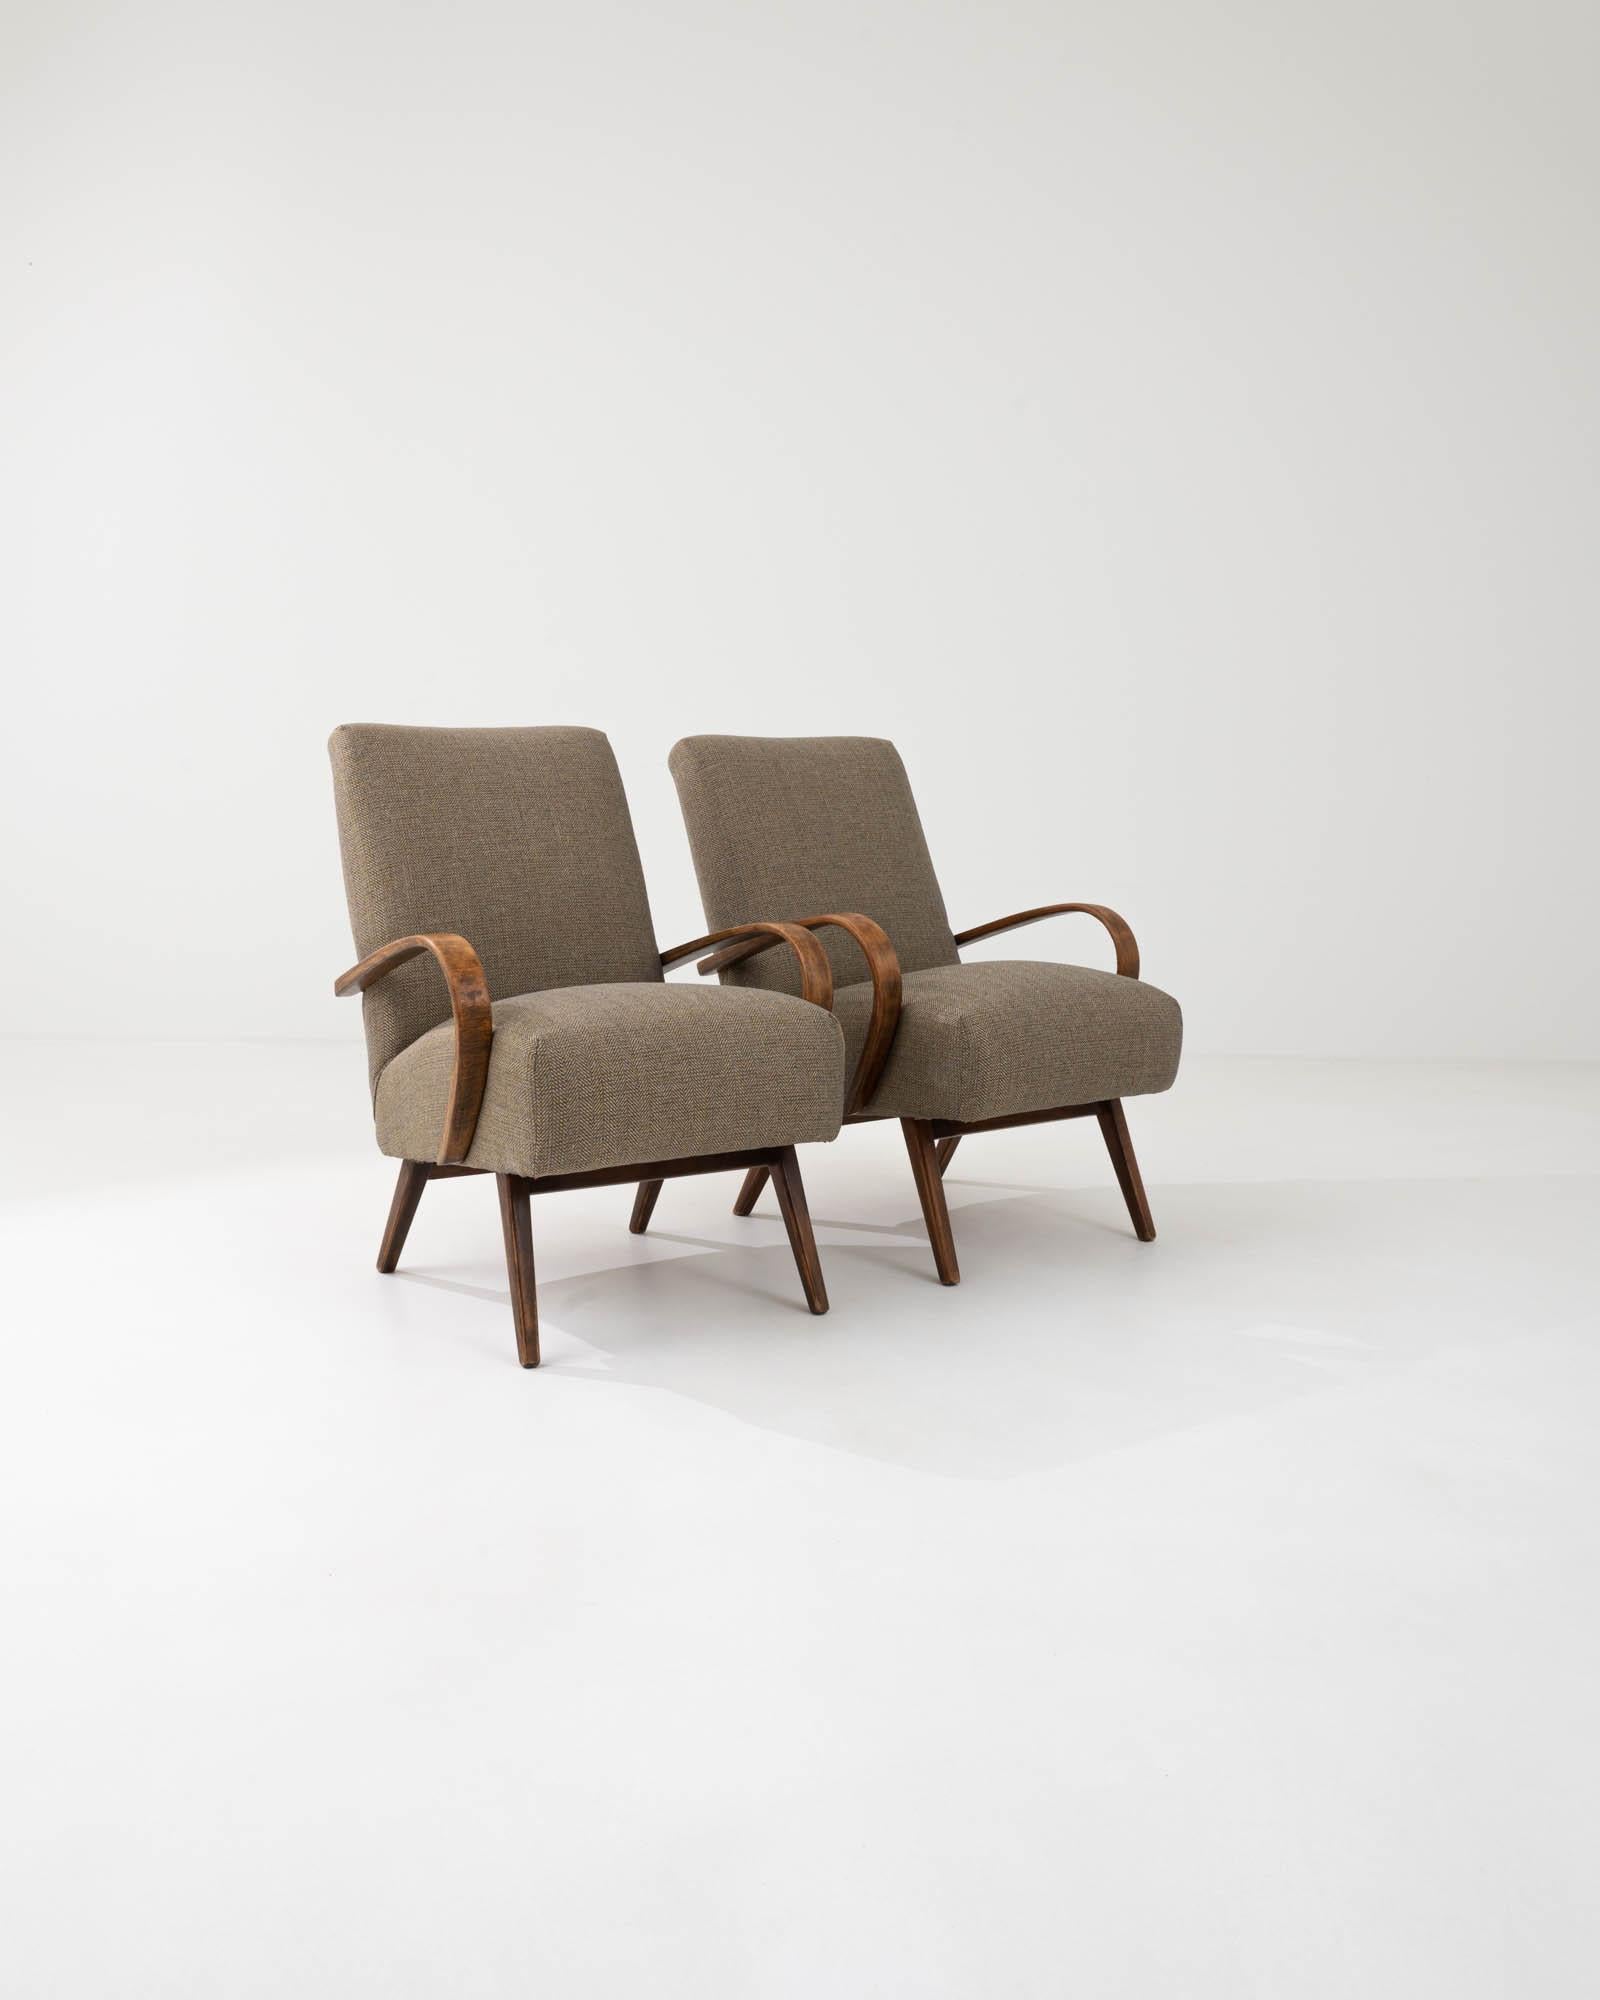 1950s Czech Beige Upholstered Armchairs, a Pair For Sale 3